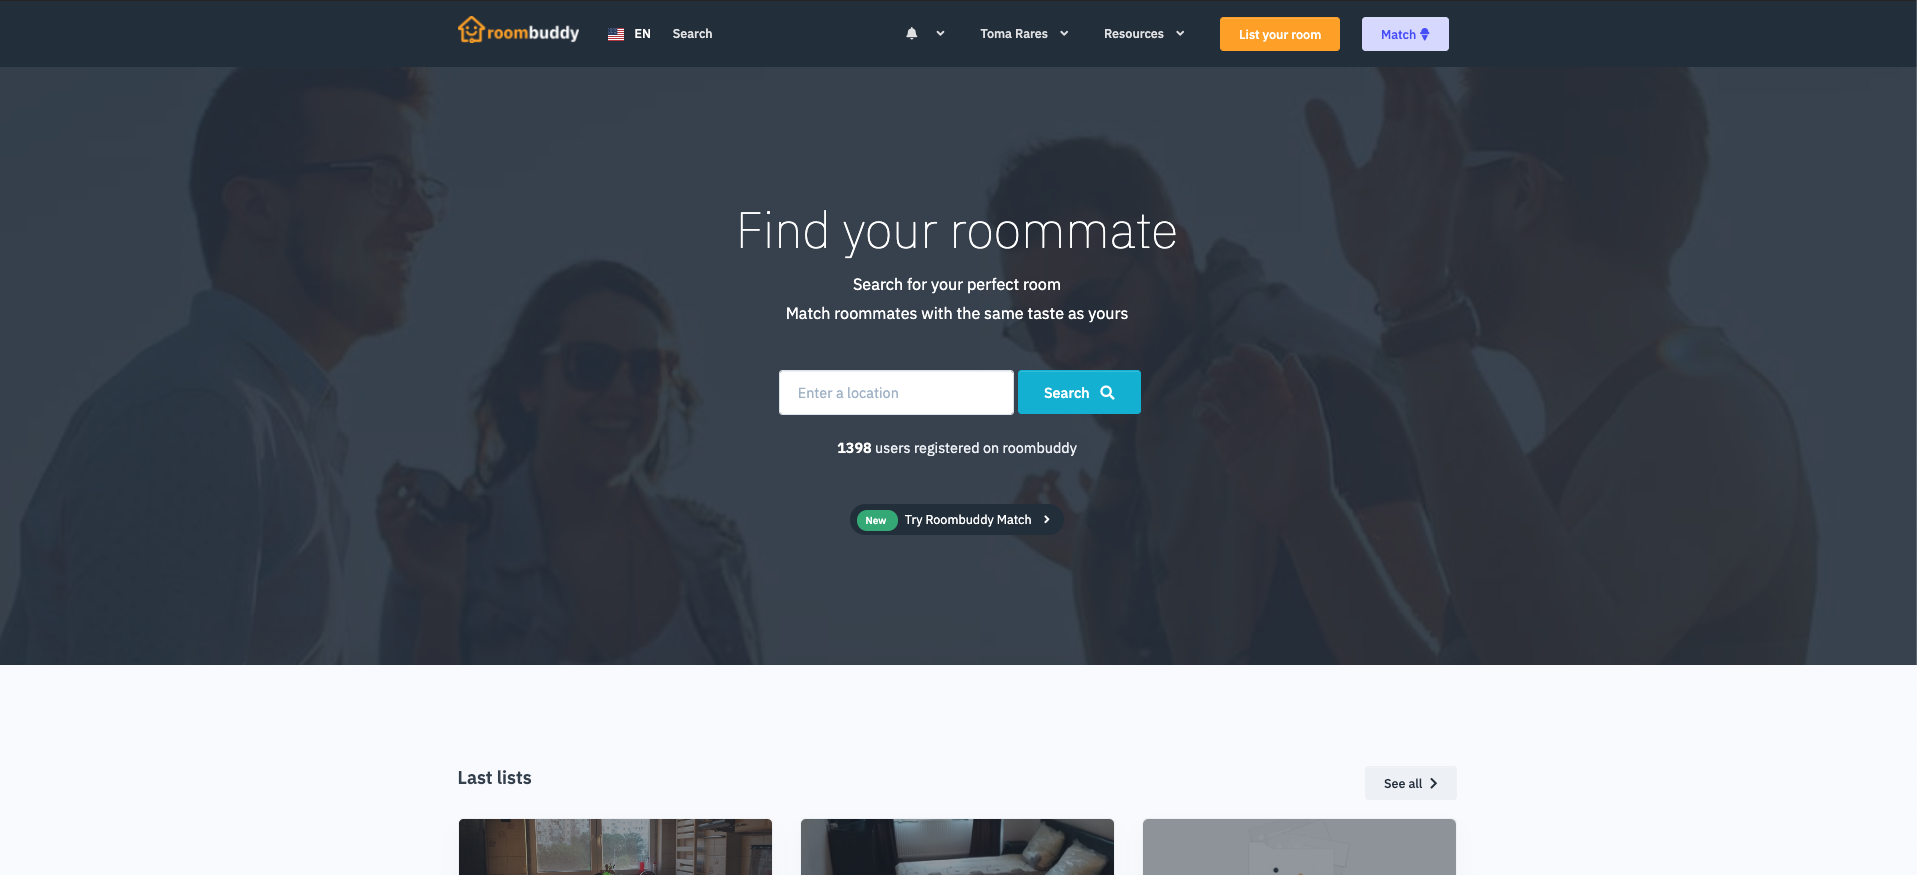 Find detailed information about Roombuddy